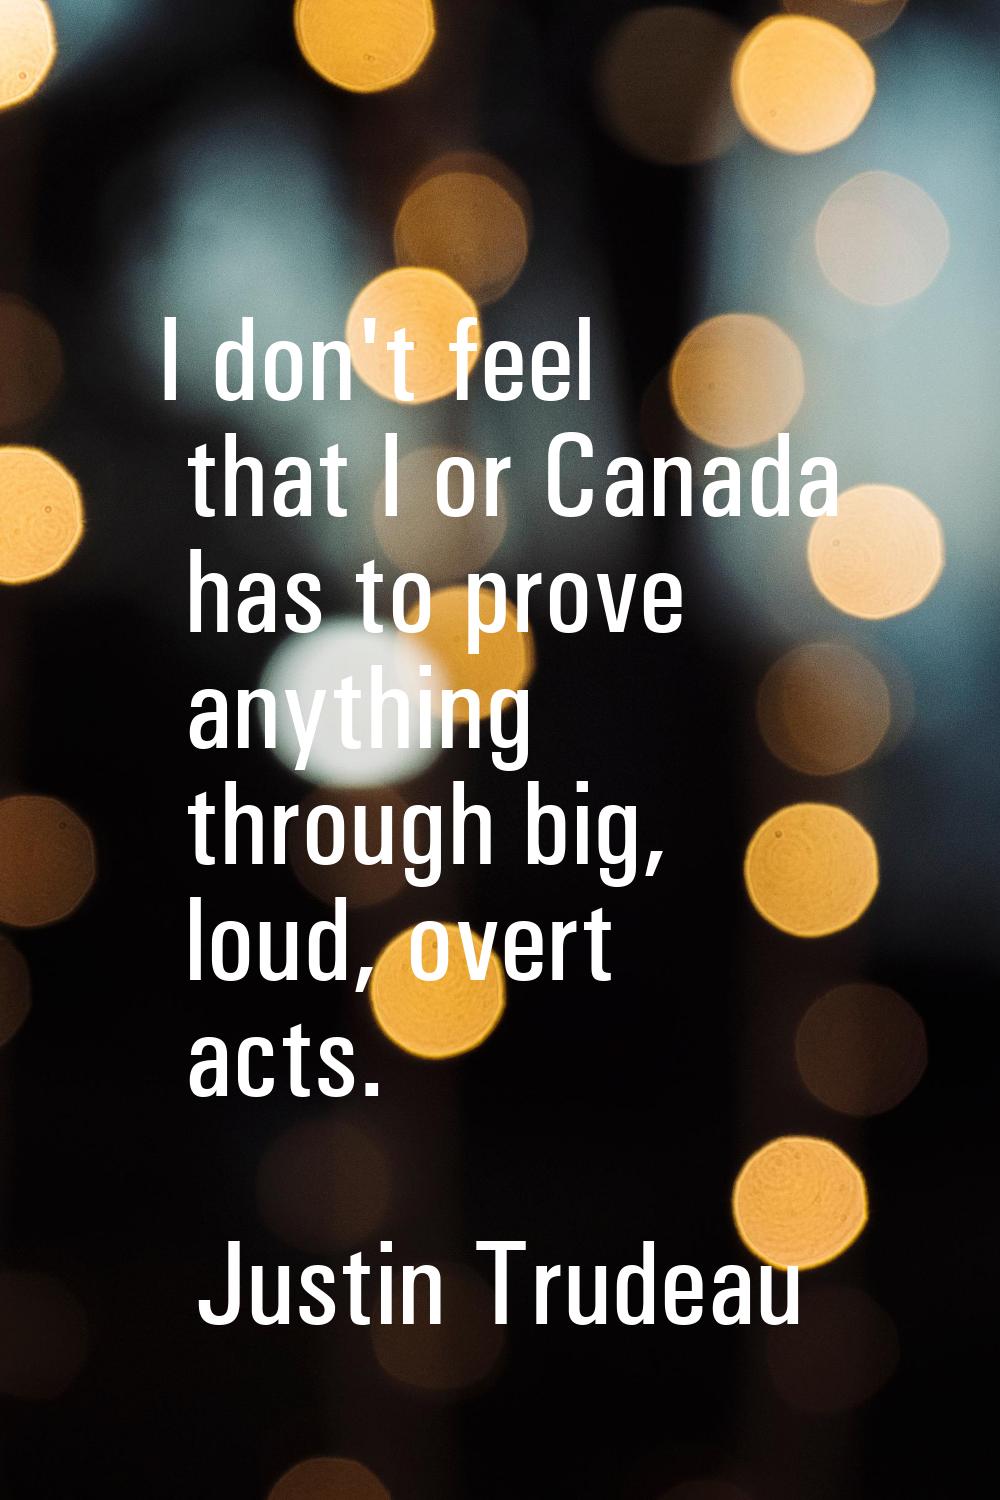 I don't feel that I or Canada has to prove anything through big, loud, overt acts.